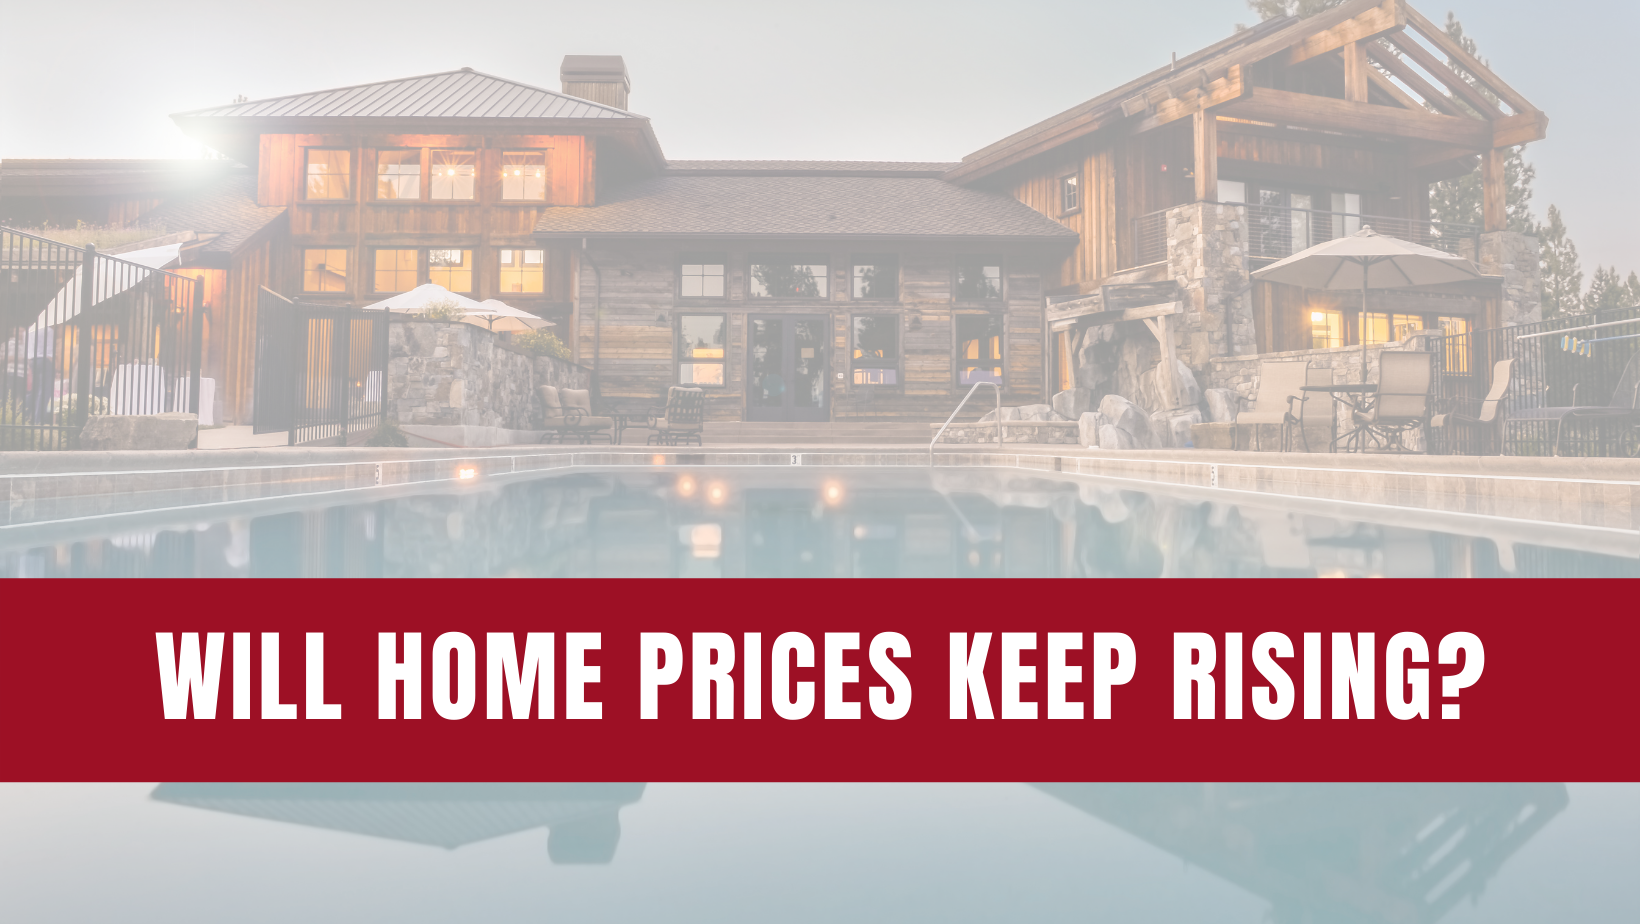 Will Home Prices Keep Rising?